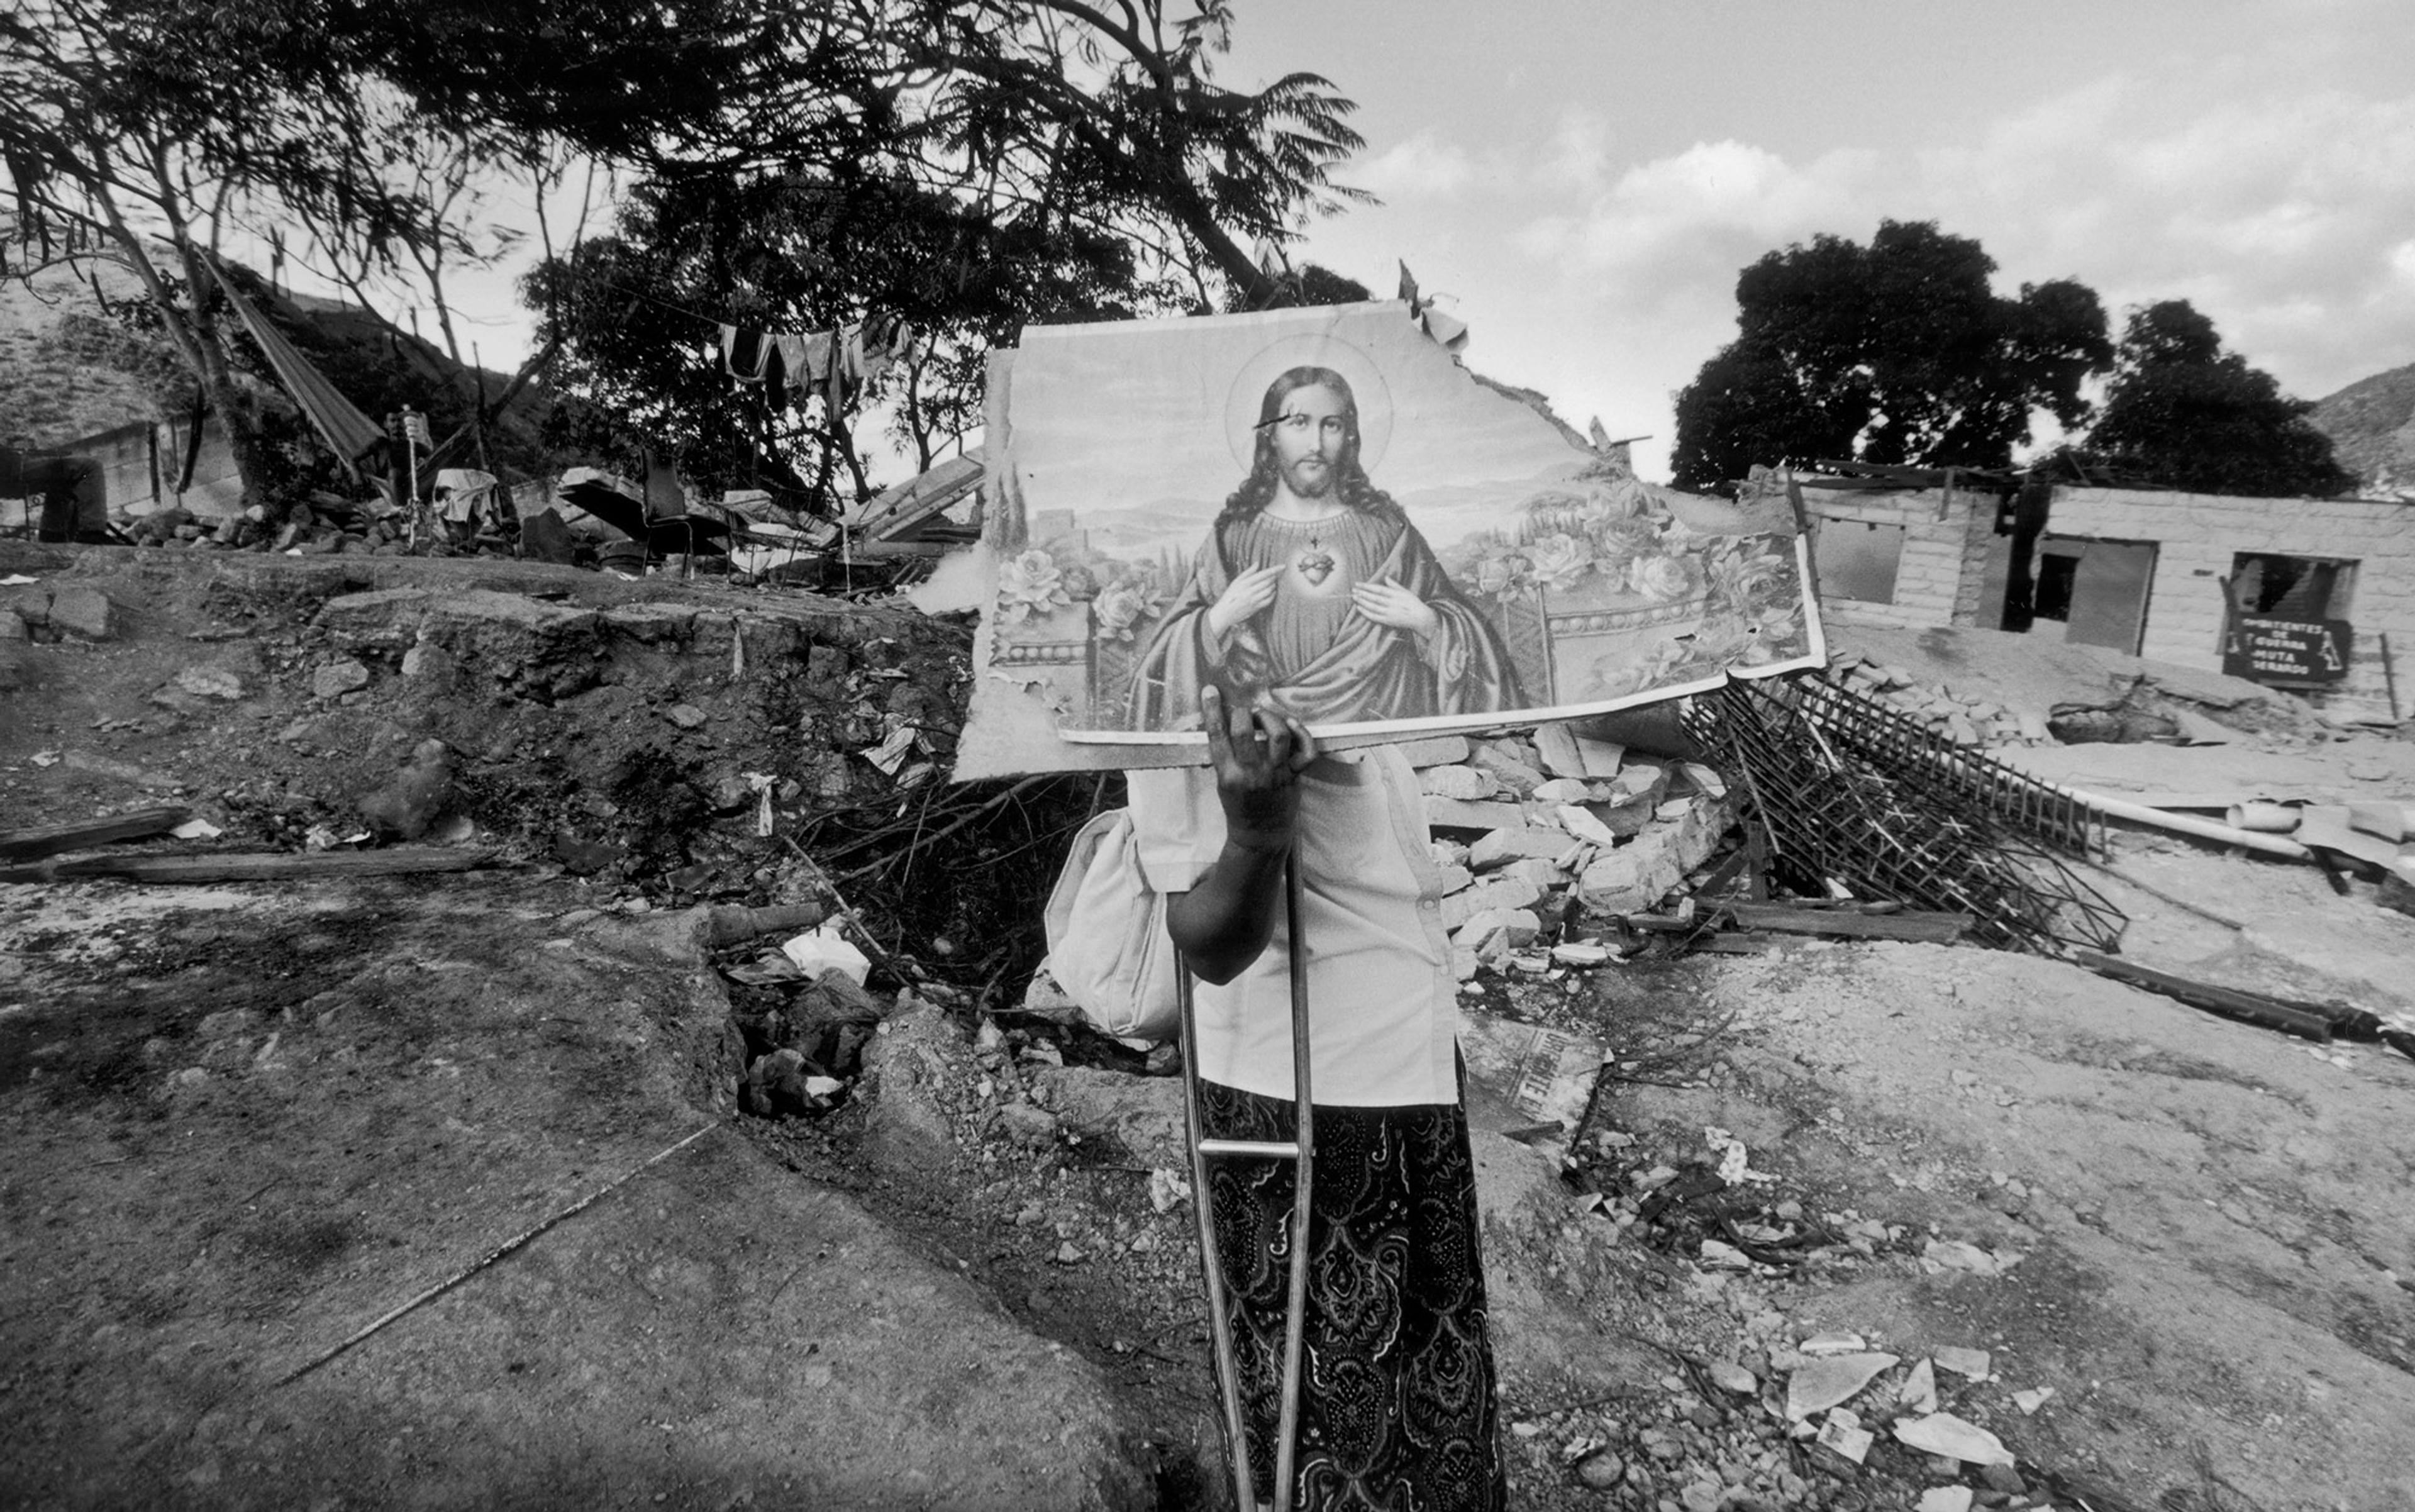 Person holding a painting of Jesus Christ amid a rubble-strewn landscape with damaged buildings and trees in the background.